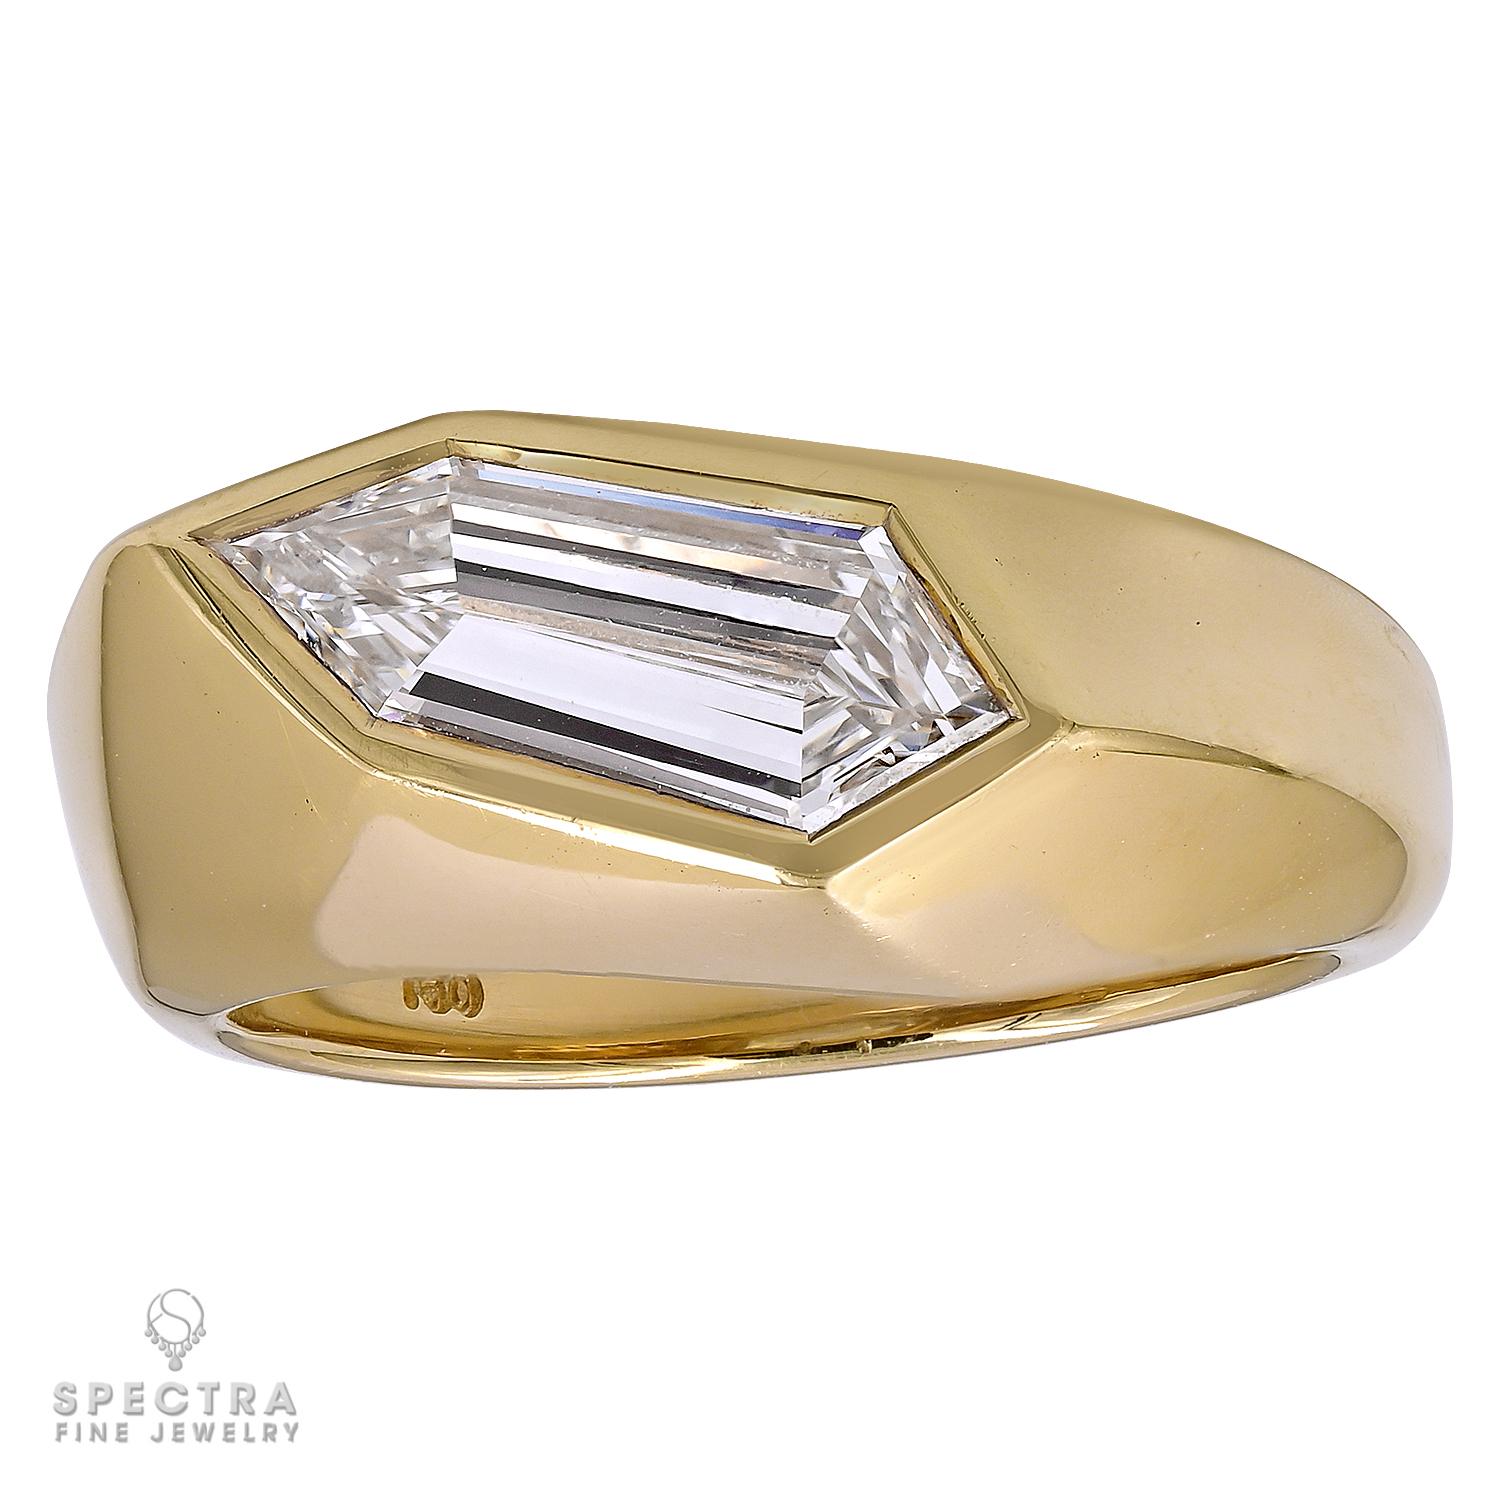 Step into the realm of modern sophistication with this striking bezel-set diamond ring from Spectra Fine Jewelry, meticulously crafted in 18k yellow gold in 2023. At its core gleams a mesmerizing 1.5-carat Kite Shape Diamond, certified by GIA with H